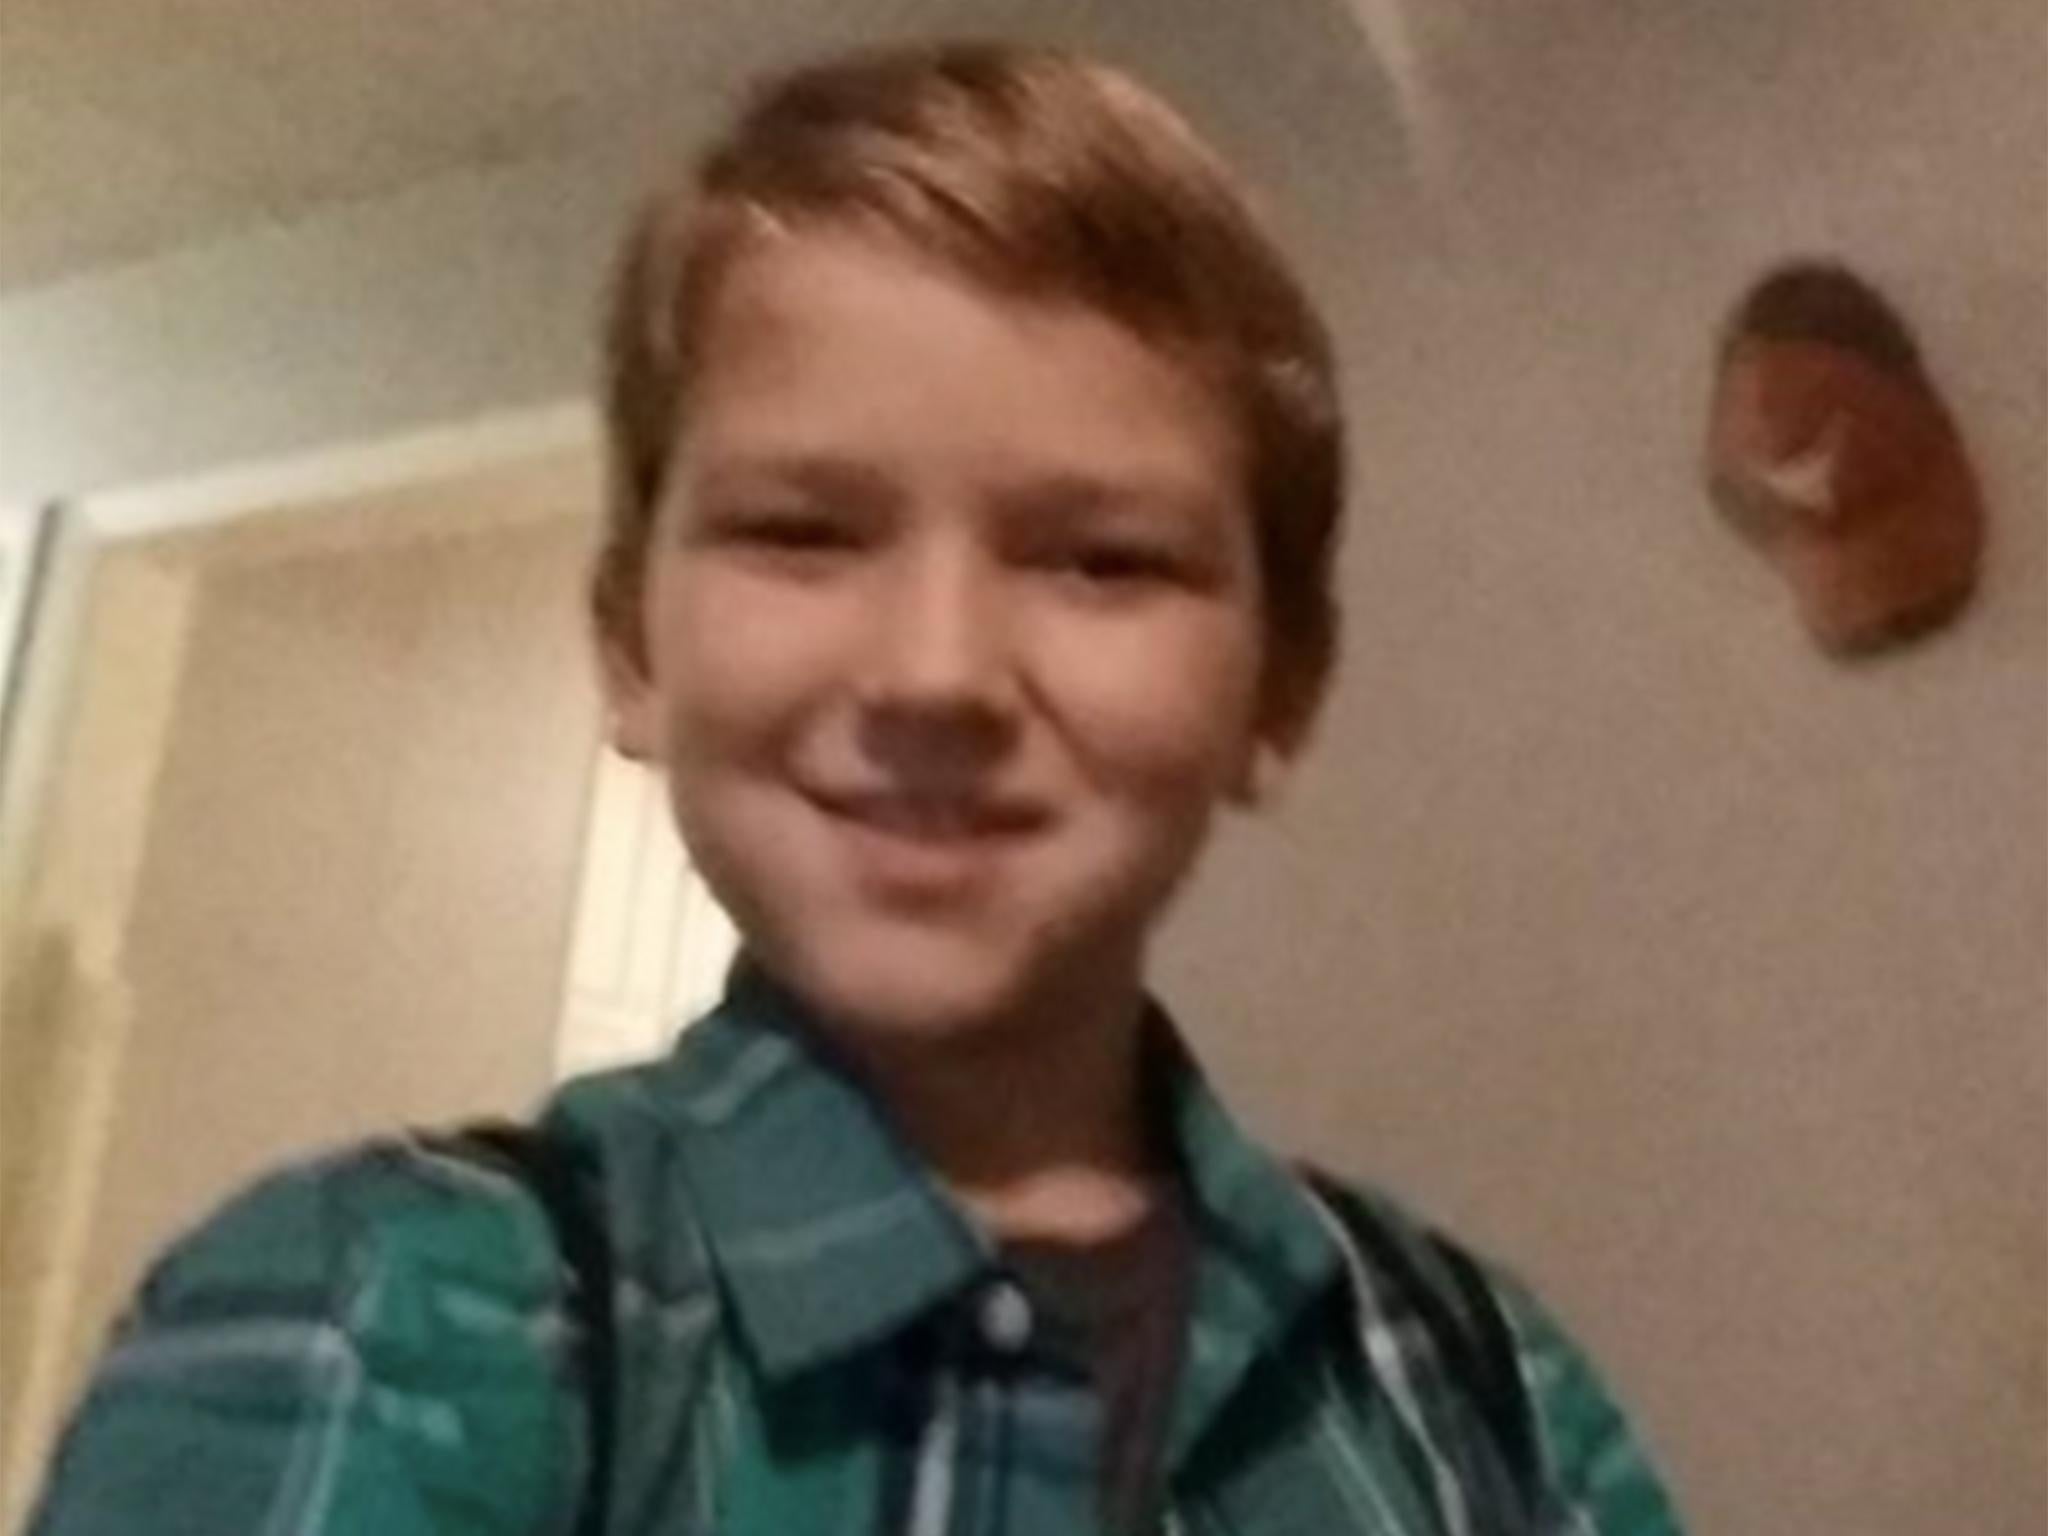 Kayden Culp, 10, is believed to have been playing in a field with two other boys when one doused him with petrol and set him on fire